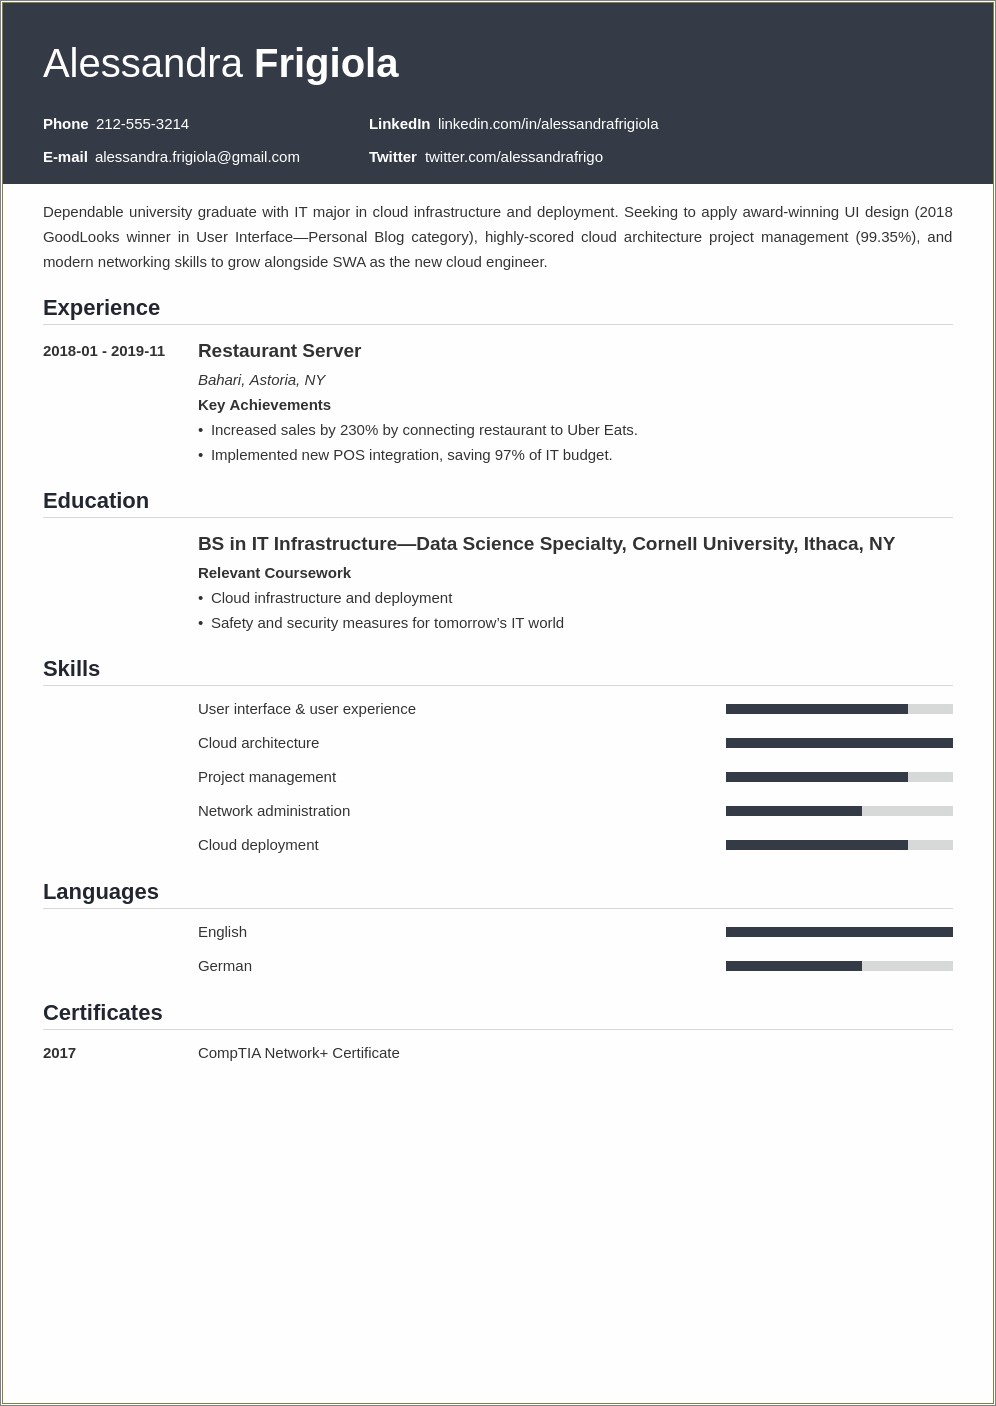 Resume Objective Seeking Or Looking For